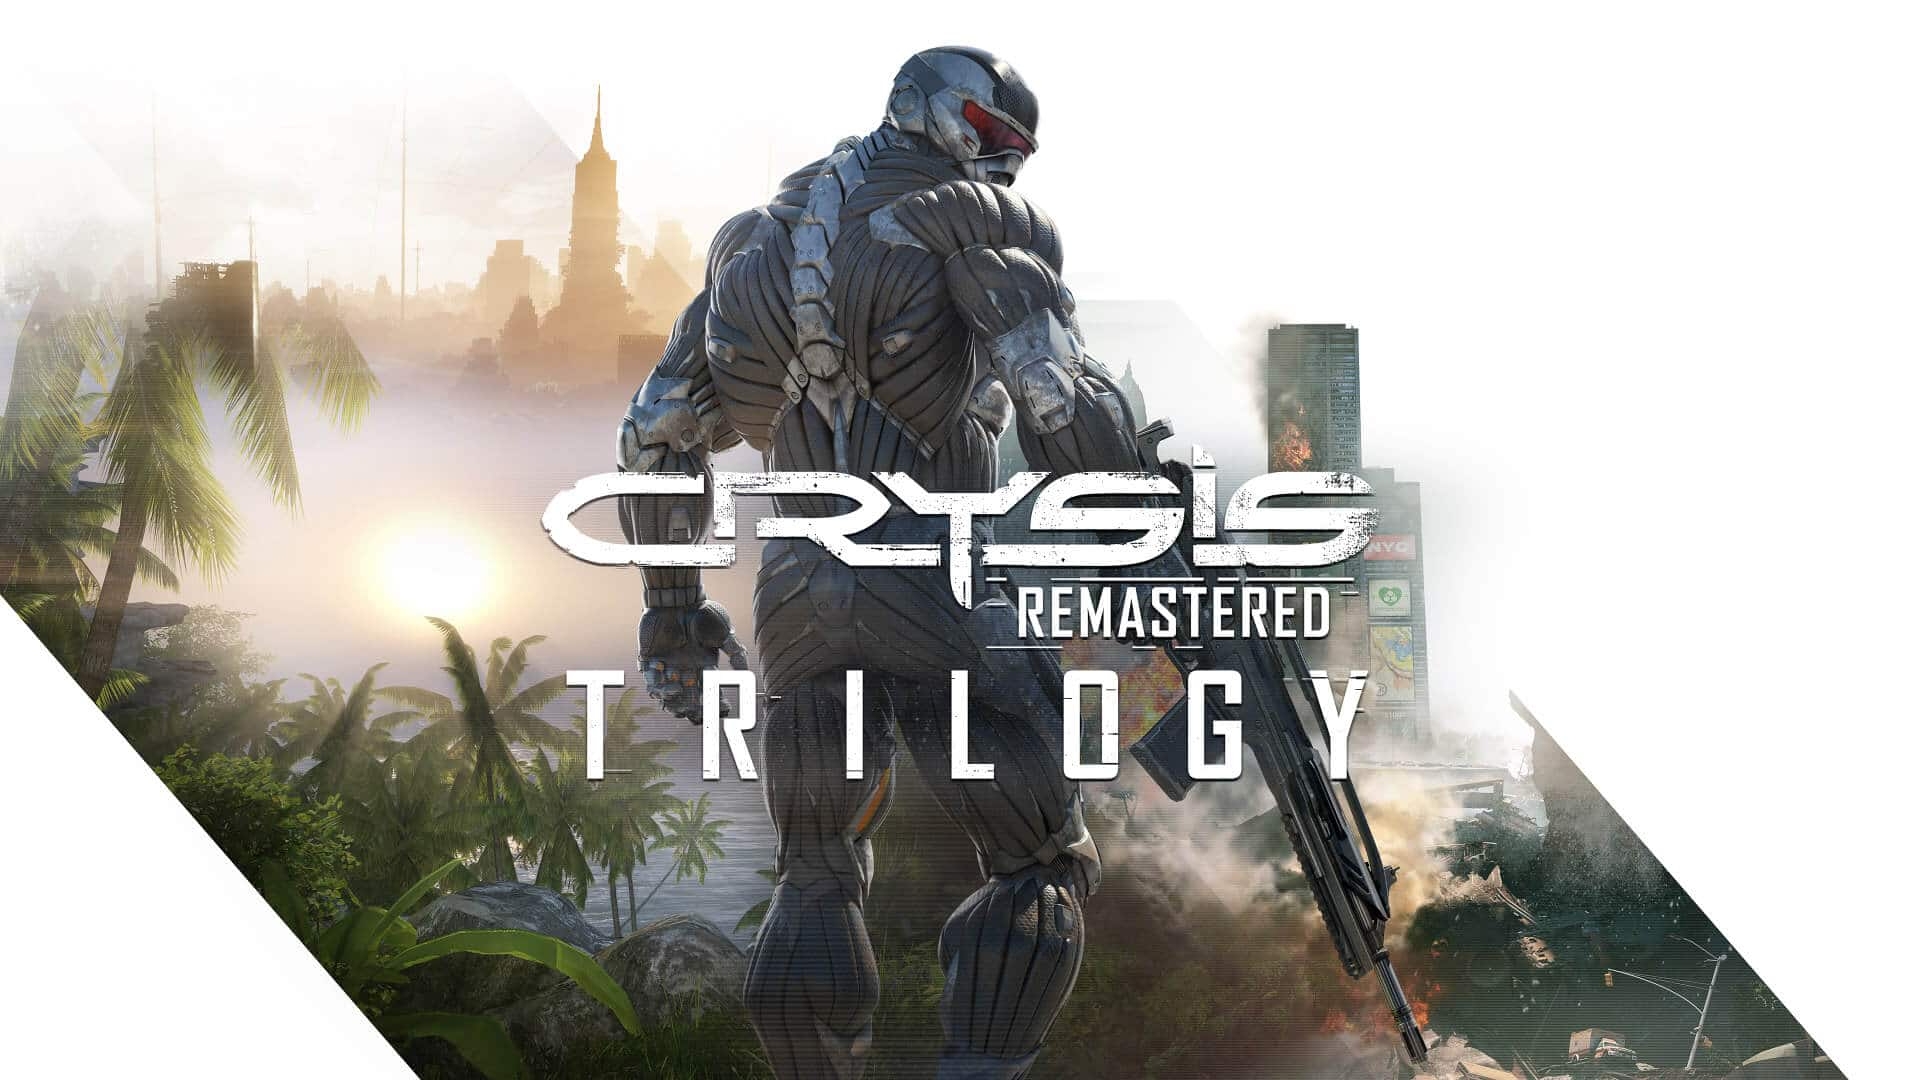 crysis-remastered-switch-cover.jpg